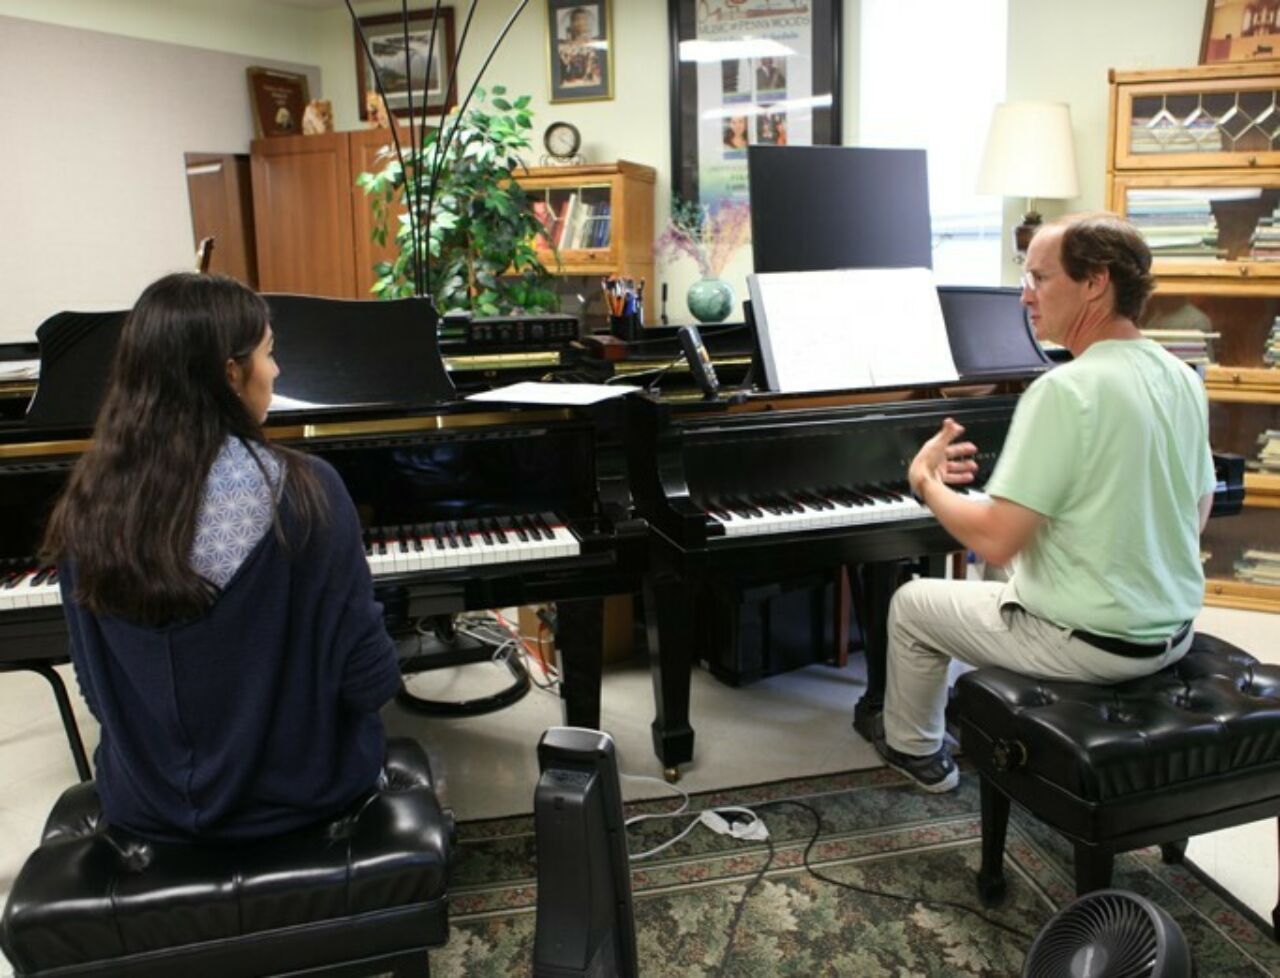 Piano instruction with faculty and student.